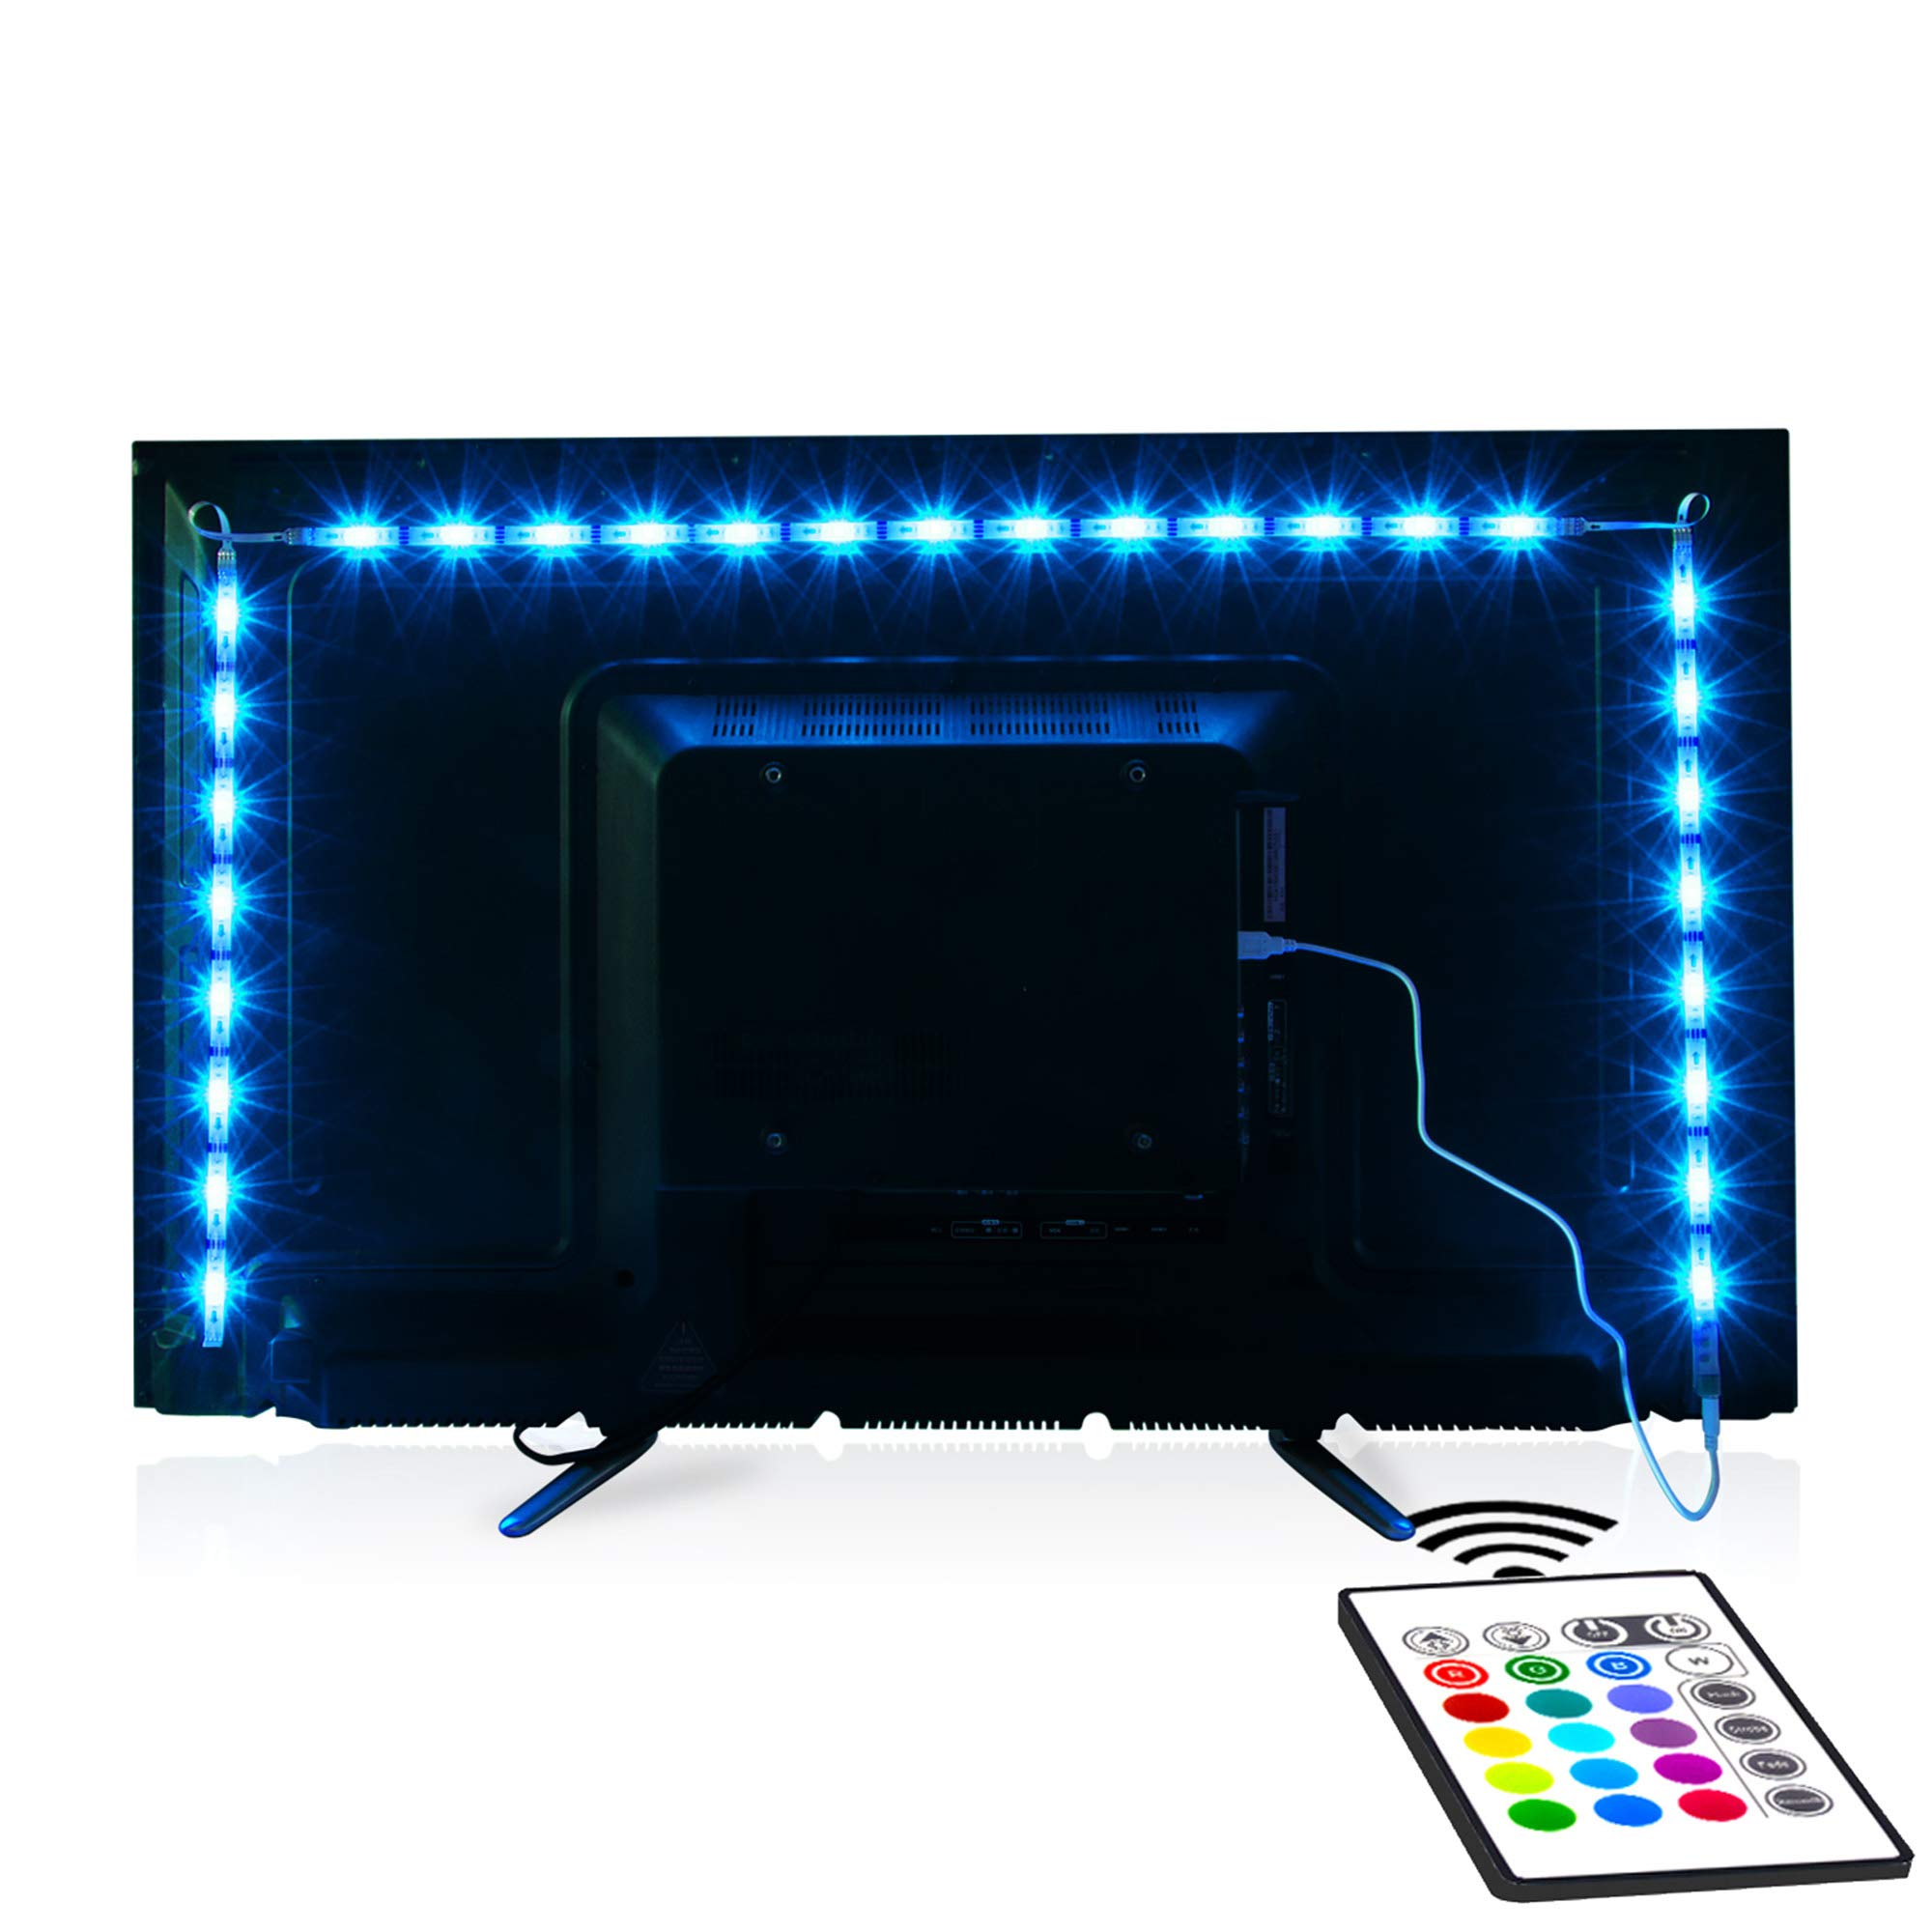 Book Cover Tv Led Backlight,Maylit Pre-Cut 6.56ft Led Strip Lights for 40-60in Tv,4Pcs USB Powered Tv Lights kit with Remote,RGB Bias Lighting for Room Decor 6.56FT for 40''-60'' TV